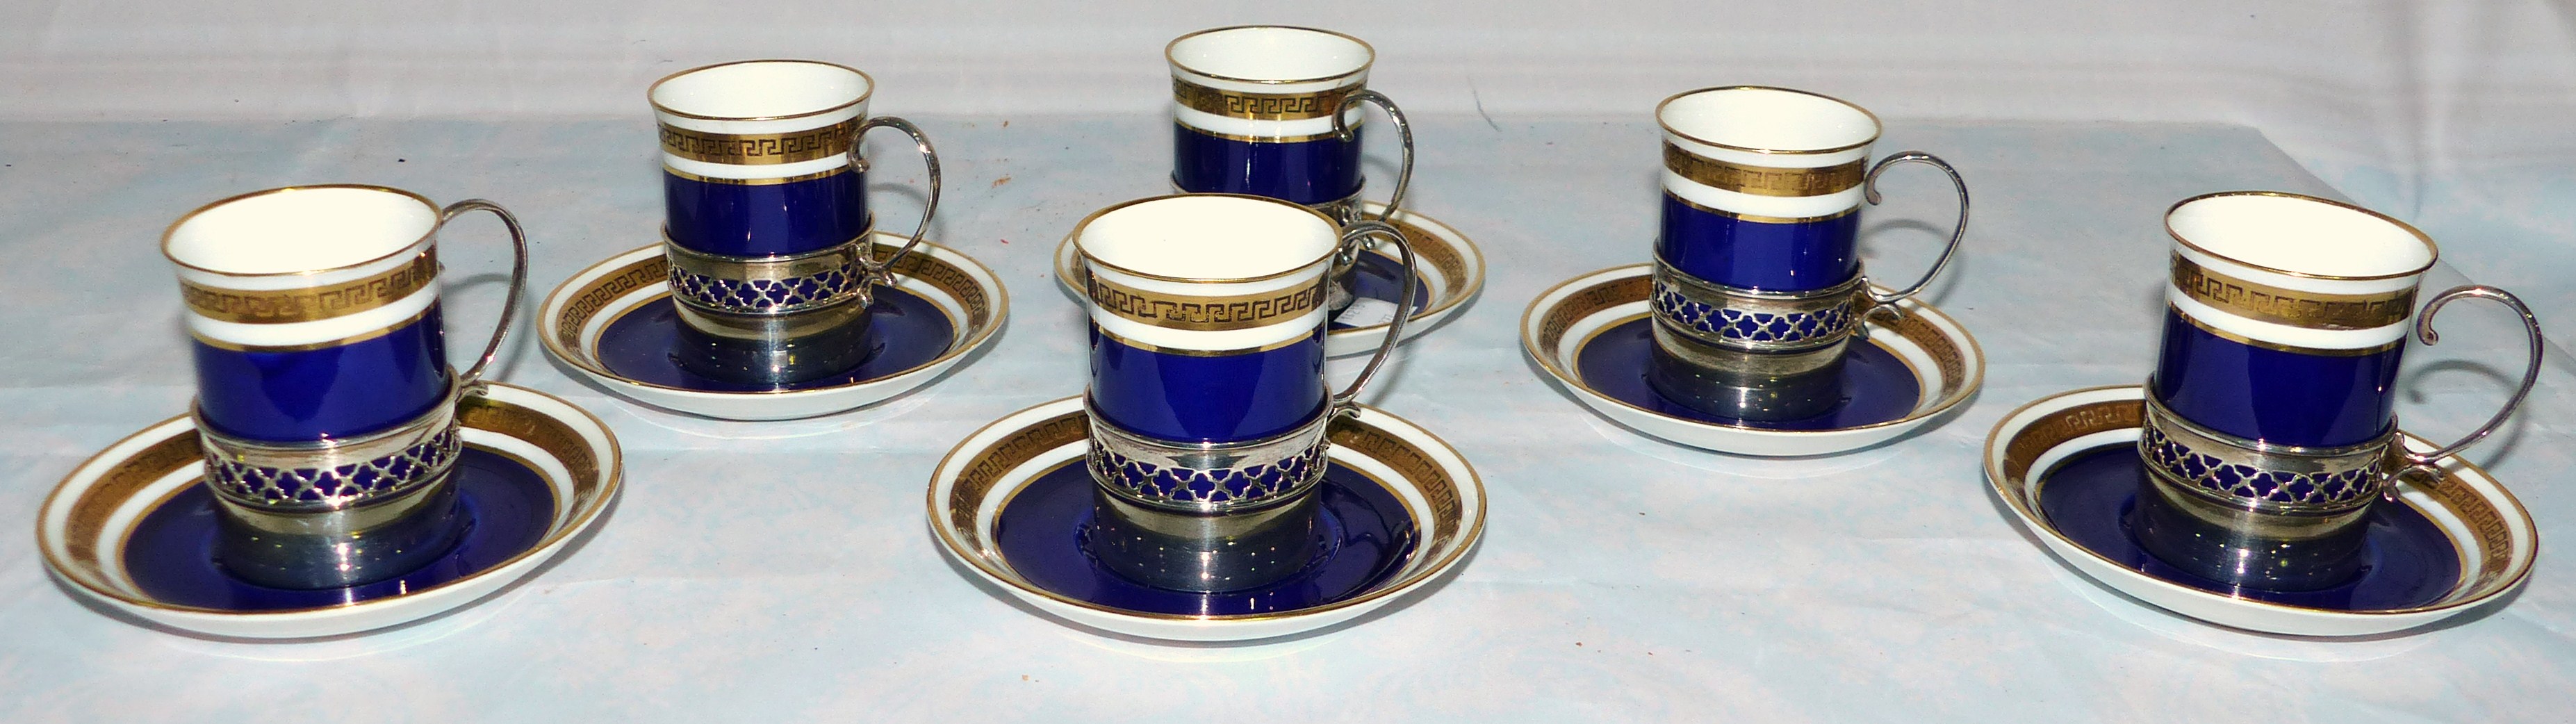 A set of 6 Crescent blue and gilt coffee cups and saucers with hall marked silver mounts